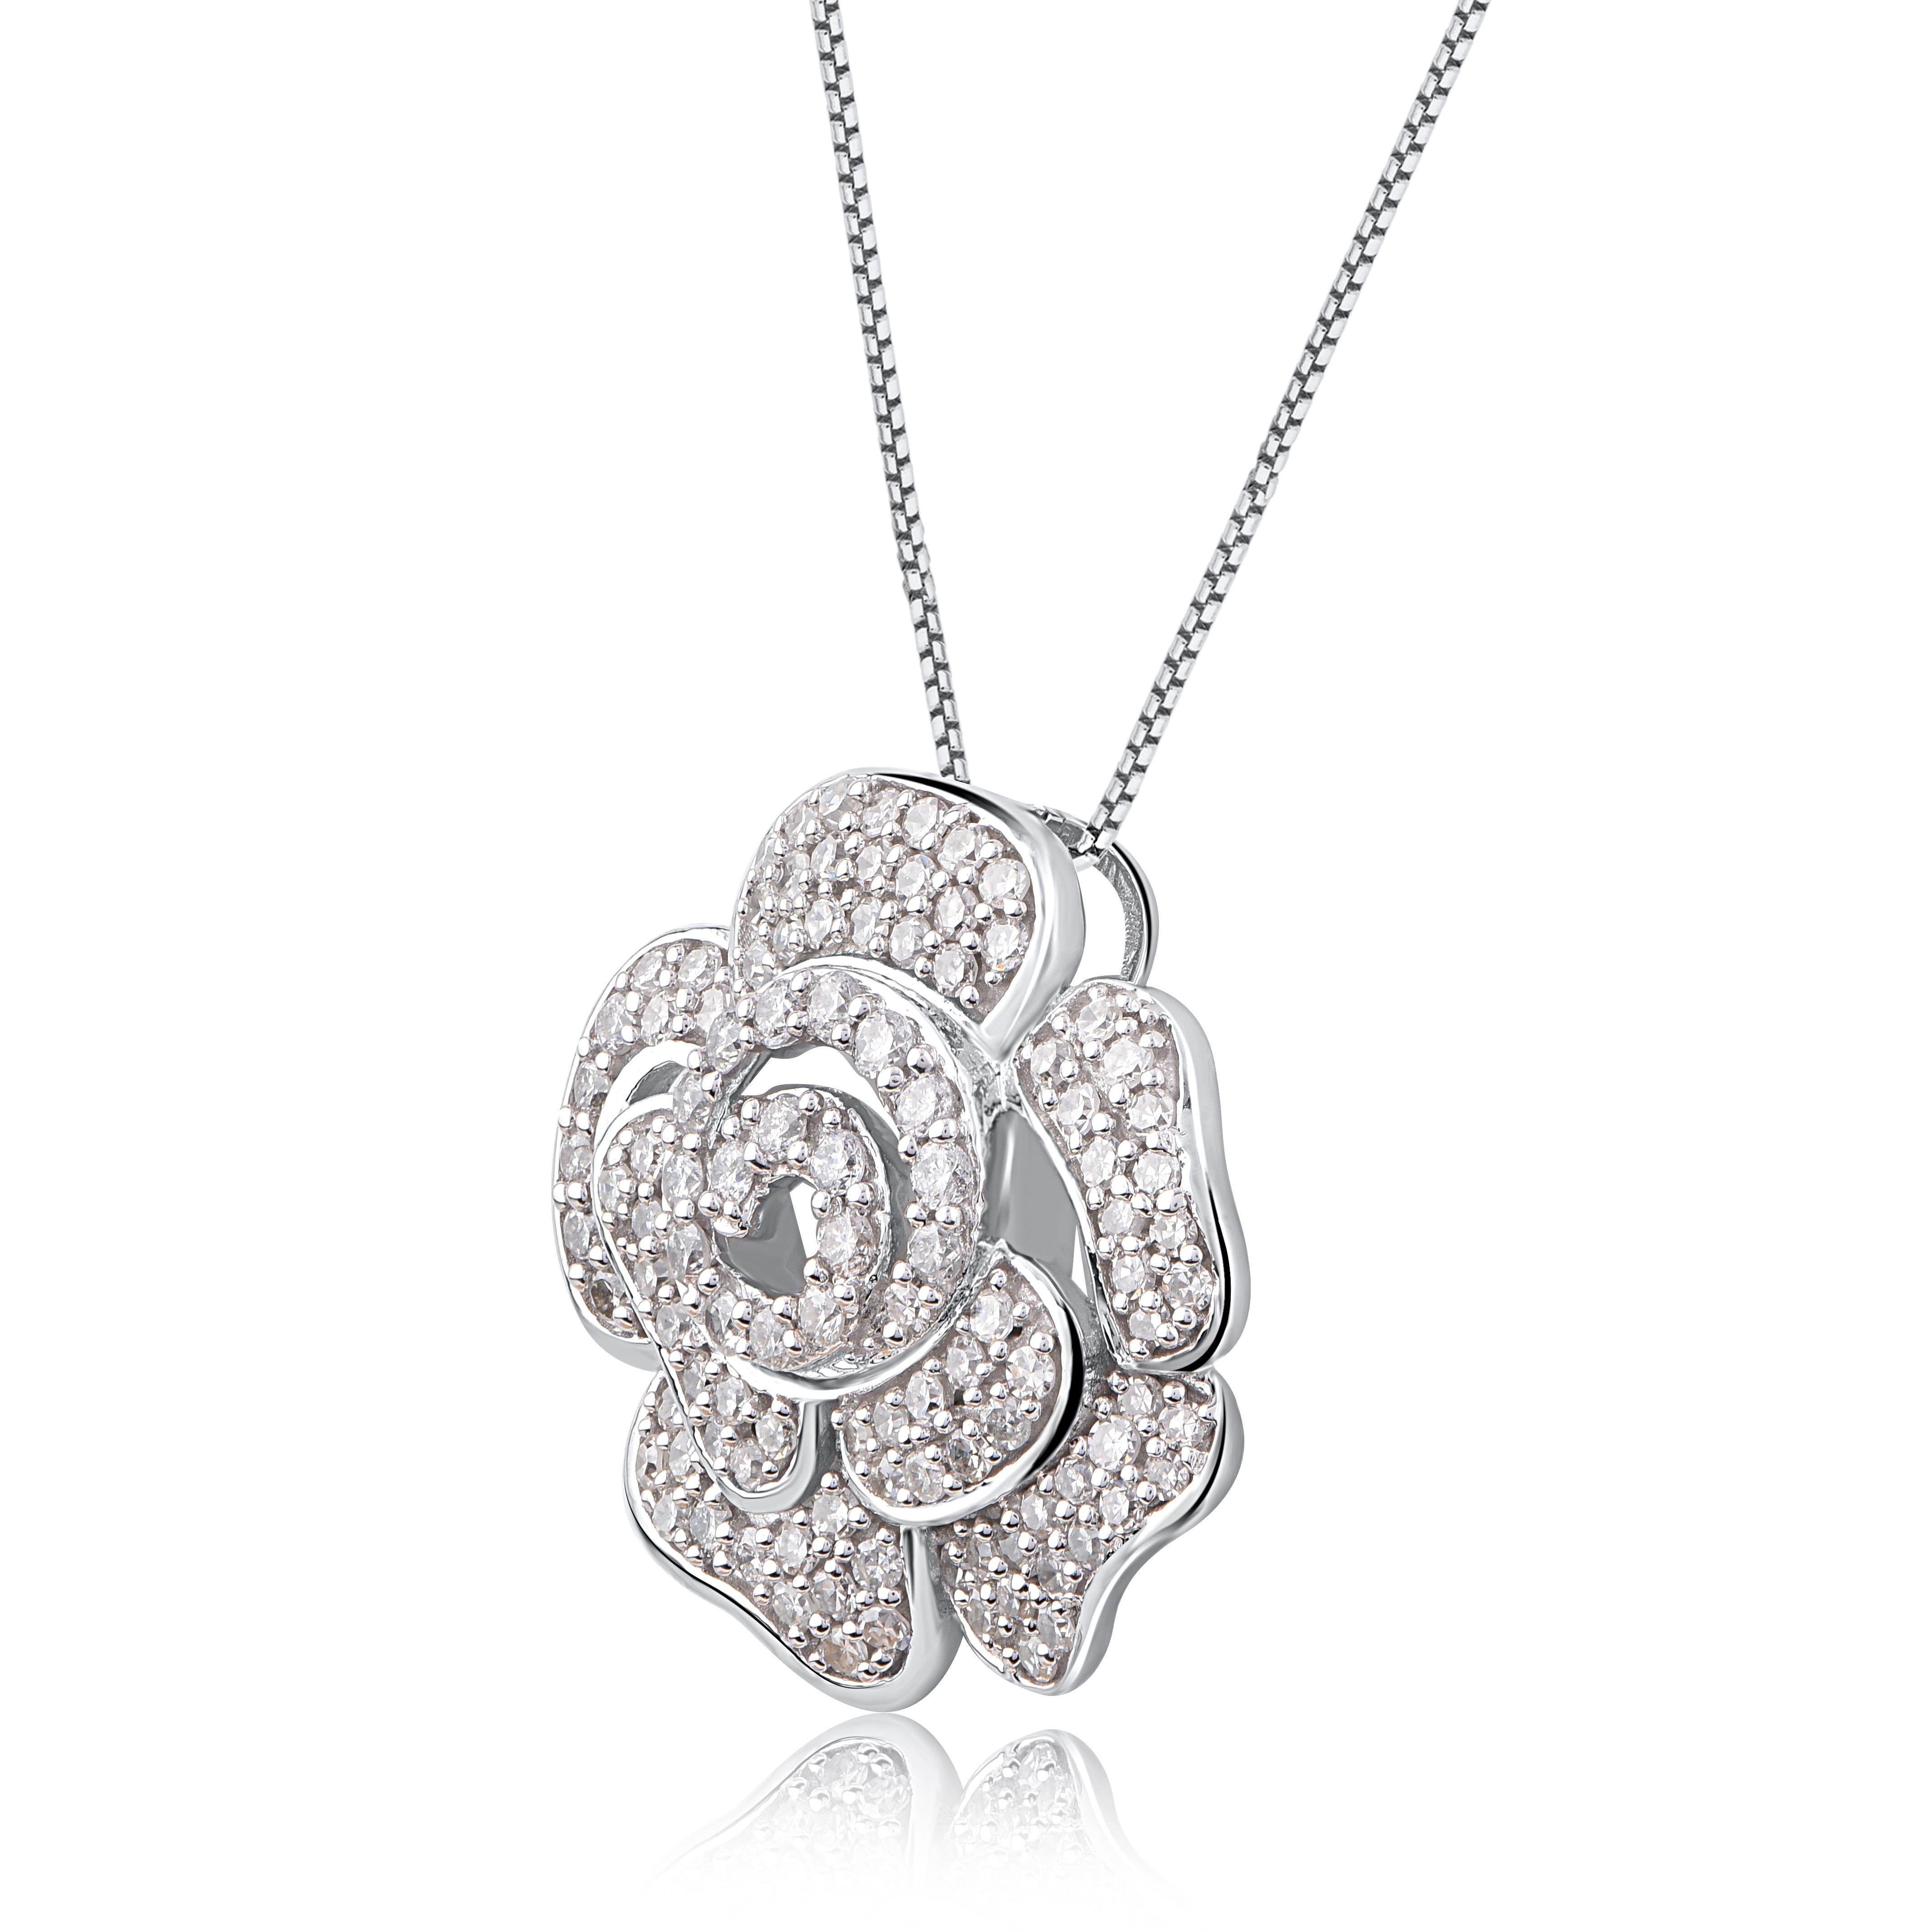 Sweetly shimmering, this diamond pendant is a sparkling choice for day and night. This rose pendant is crafted from 14-karat white gold and features 108 single cut diamonds set in prong & pave setting. H-I color I2 clarity and a high polish finish